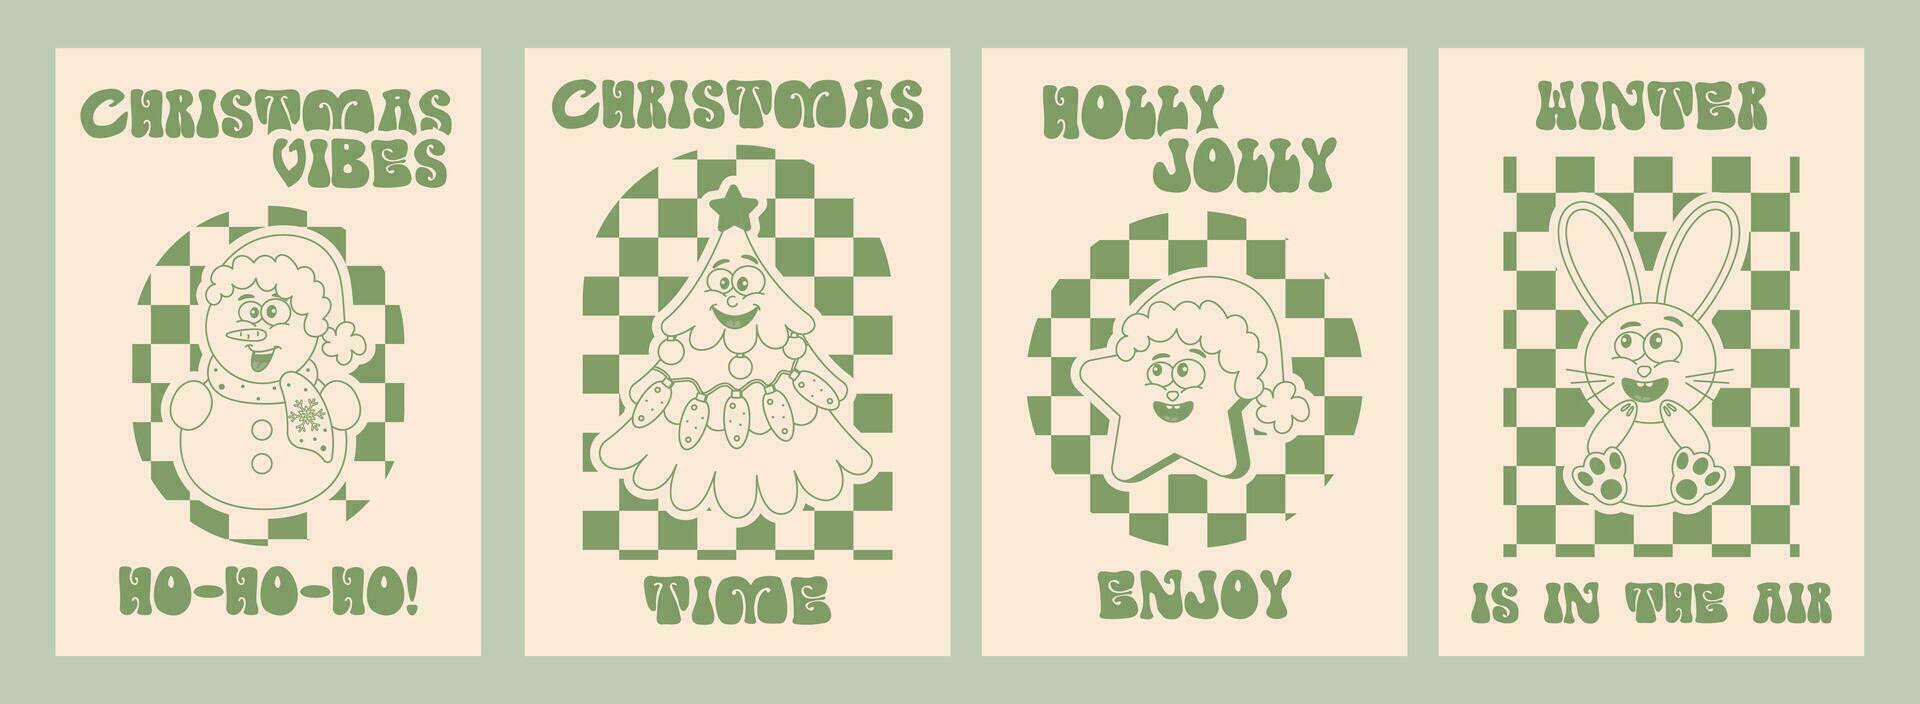 Funny Christmas retro cartoon character in 70s, 80s style. Posters with mascot snowman, star, Christmas tree, hare. Vector illustration.